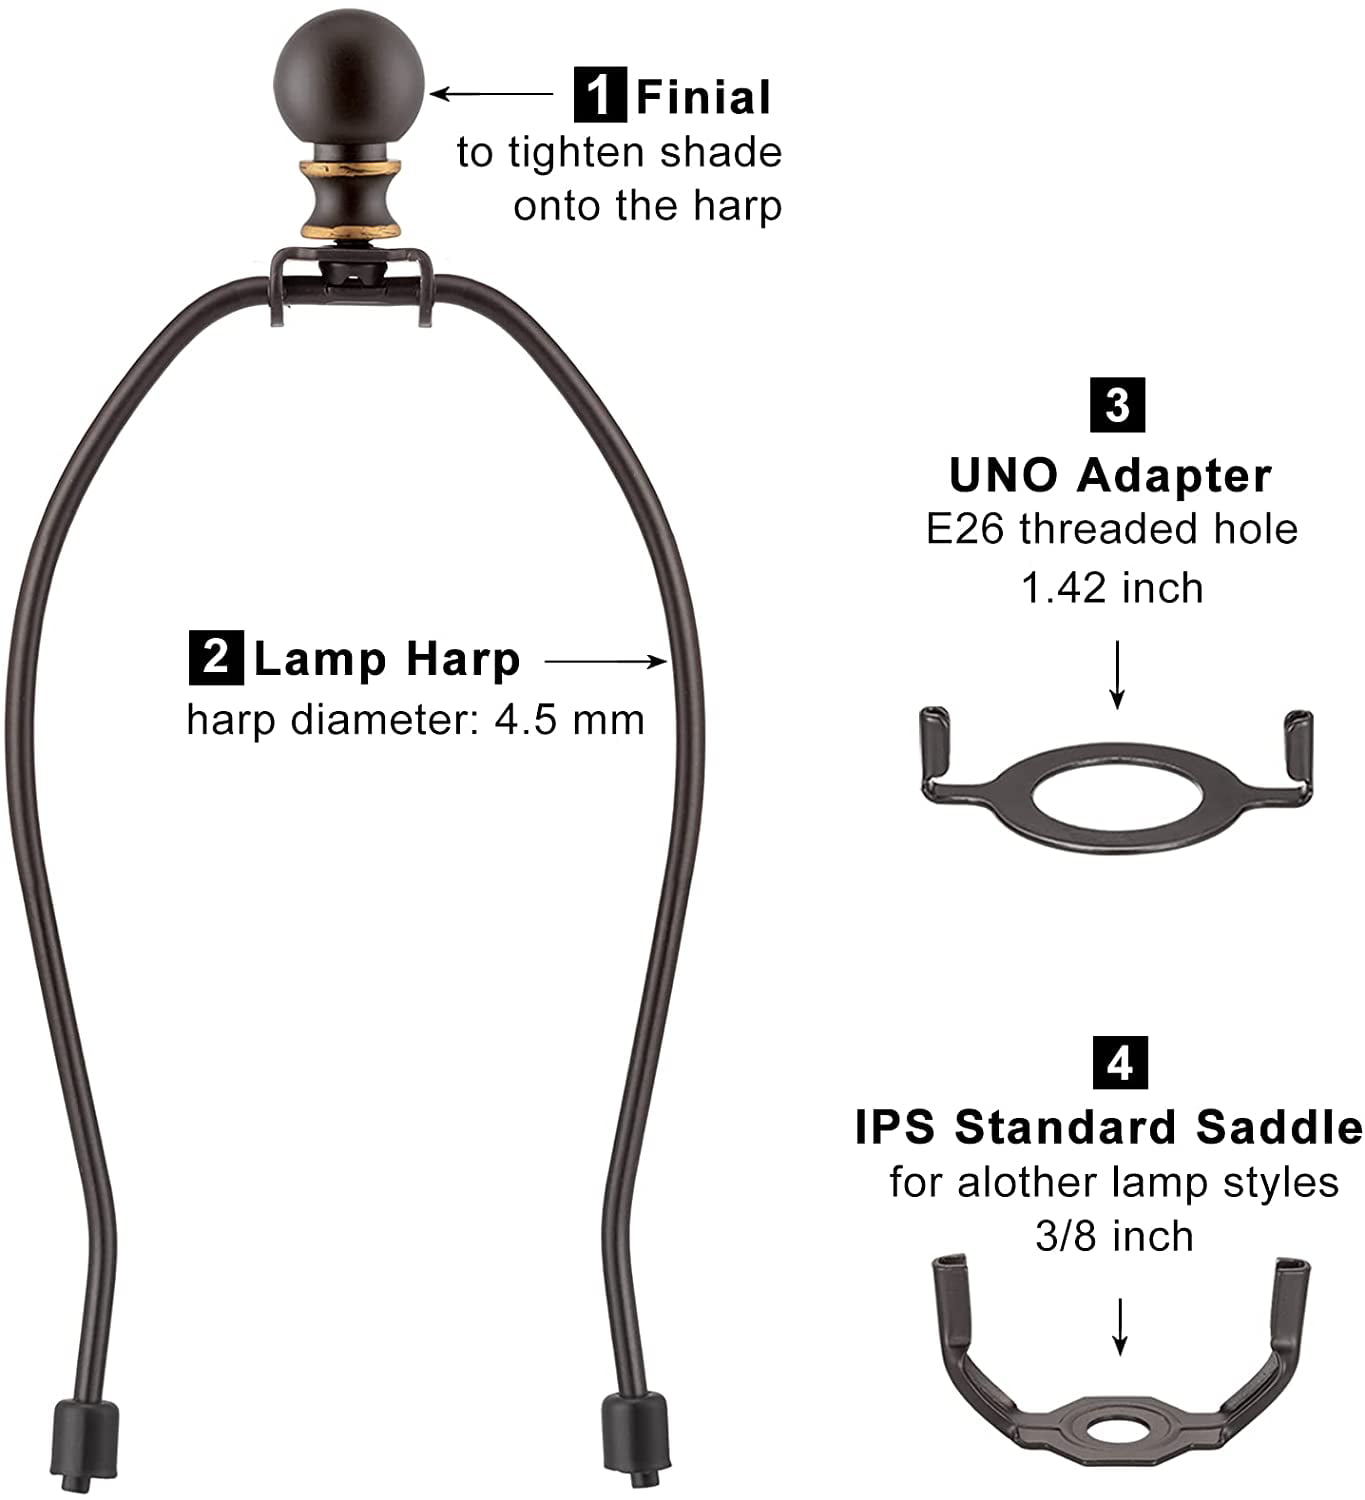 8 Inch Detachable Lamp Shade Harp Holder for Table and Floor Lamps Bronze 2 Set Heavy Duty Lamp Shade Bracket with 3/8 Standard Saddle E26 Light Base UNO Fitter Adapter and Lamp Finial 